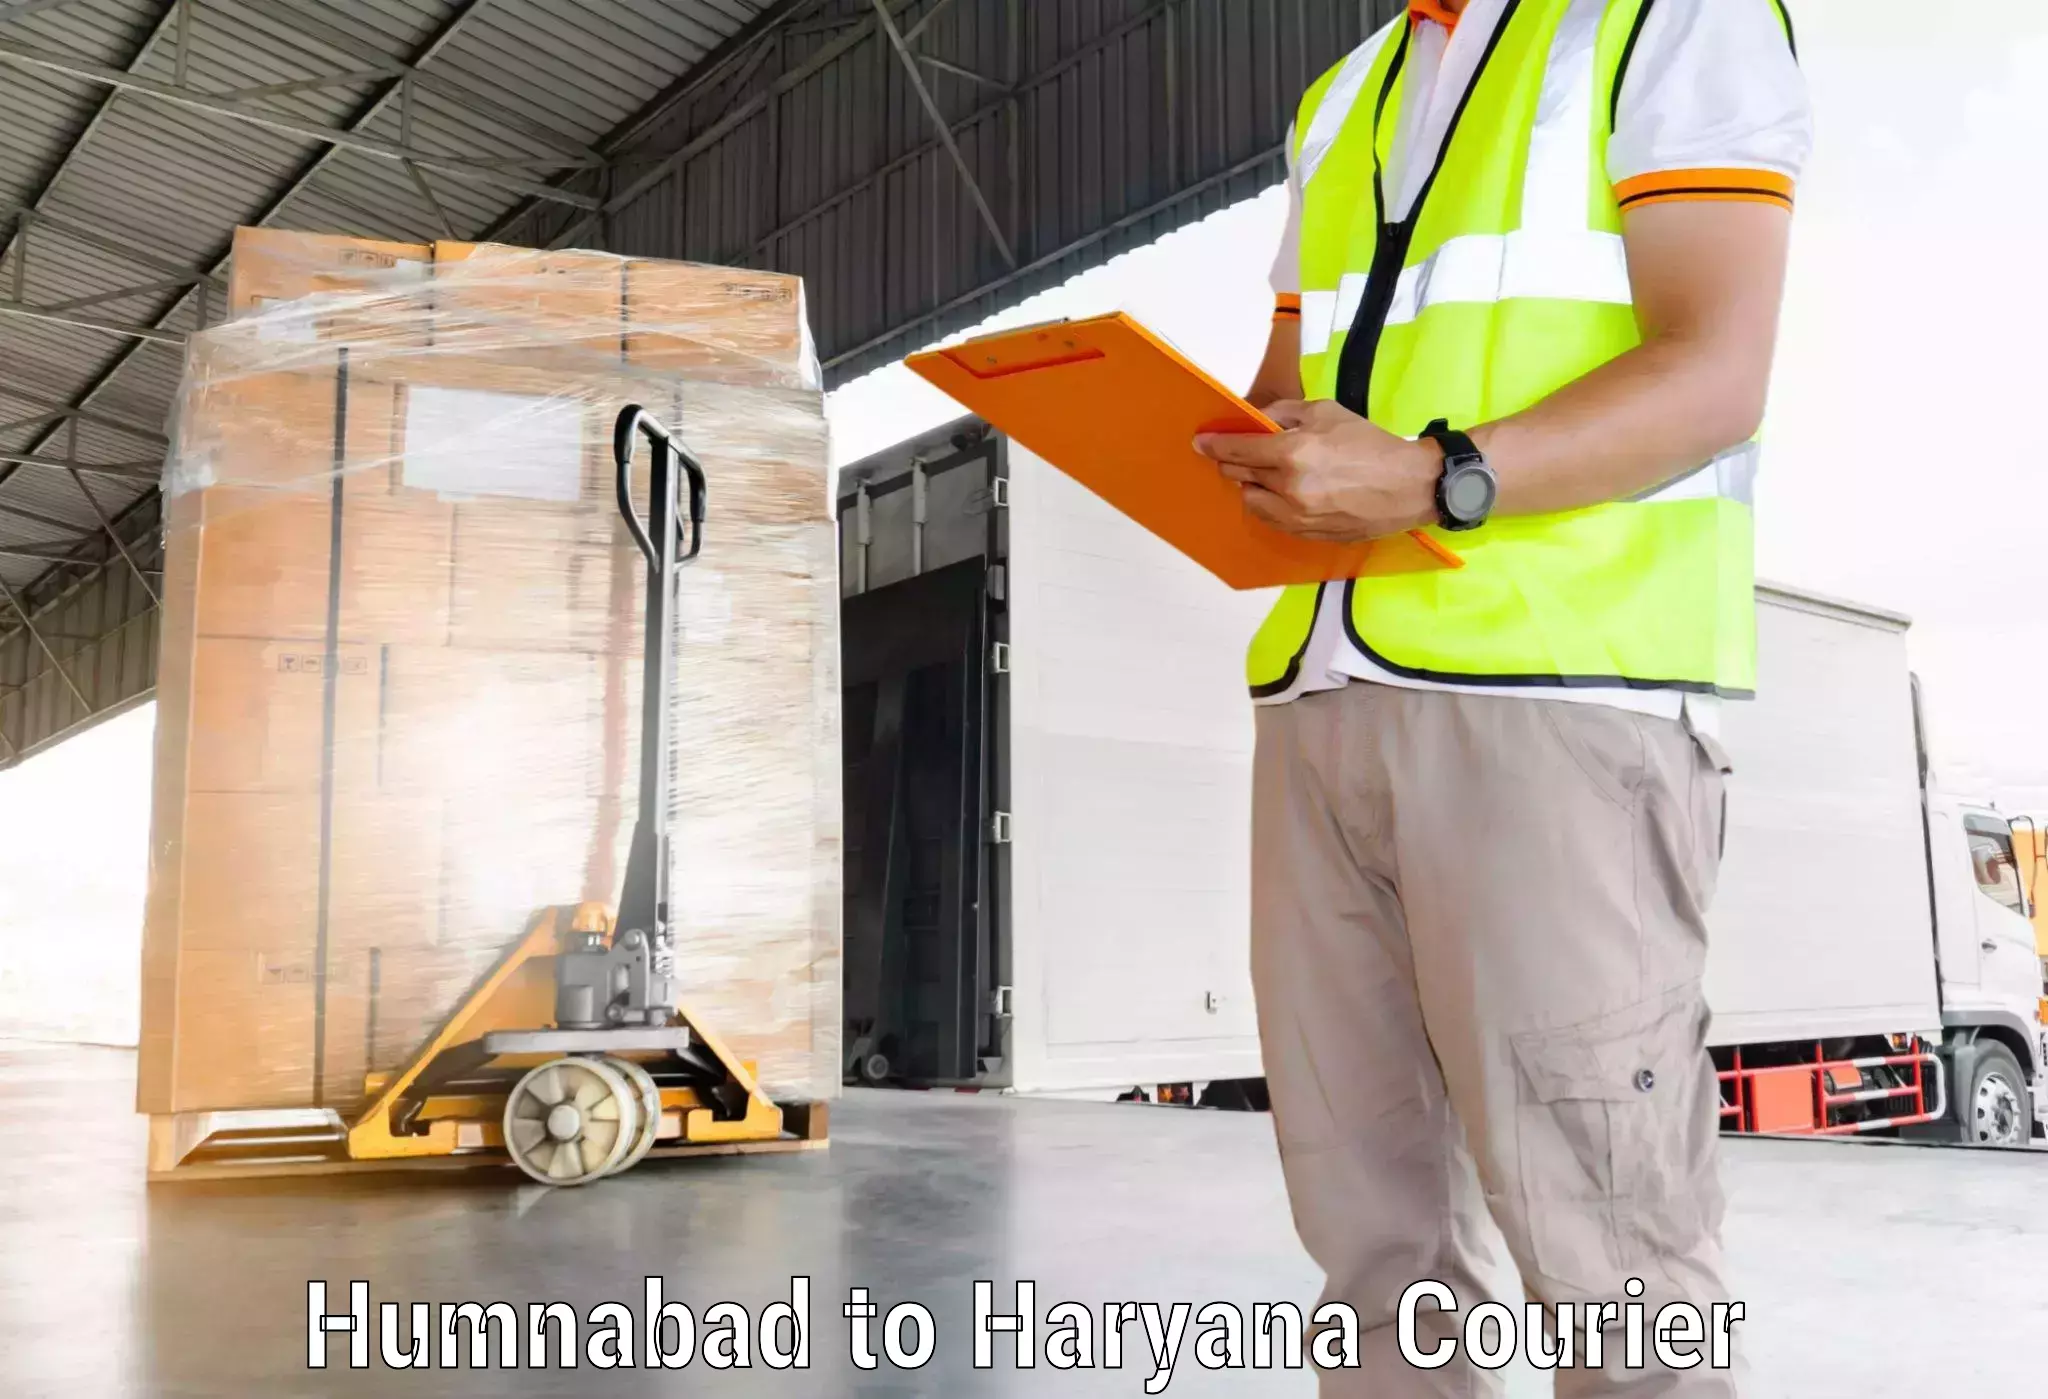 Local delivery service Humnabad to Haryana